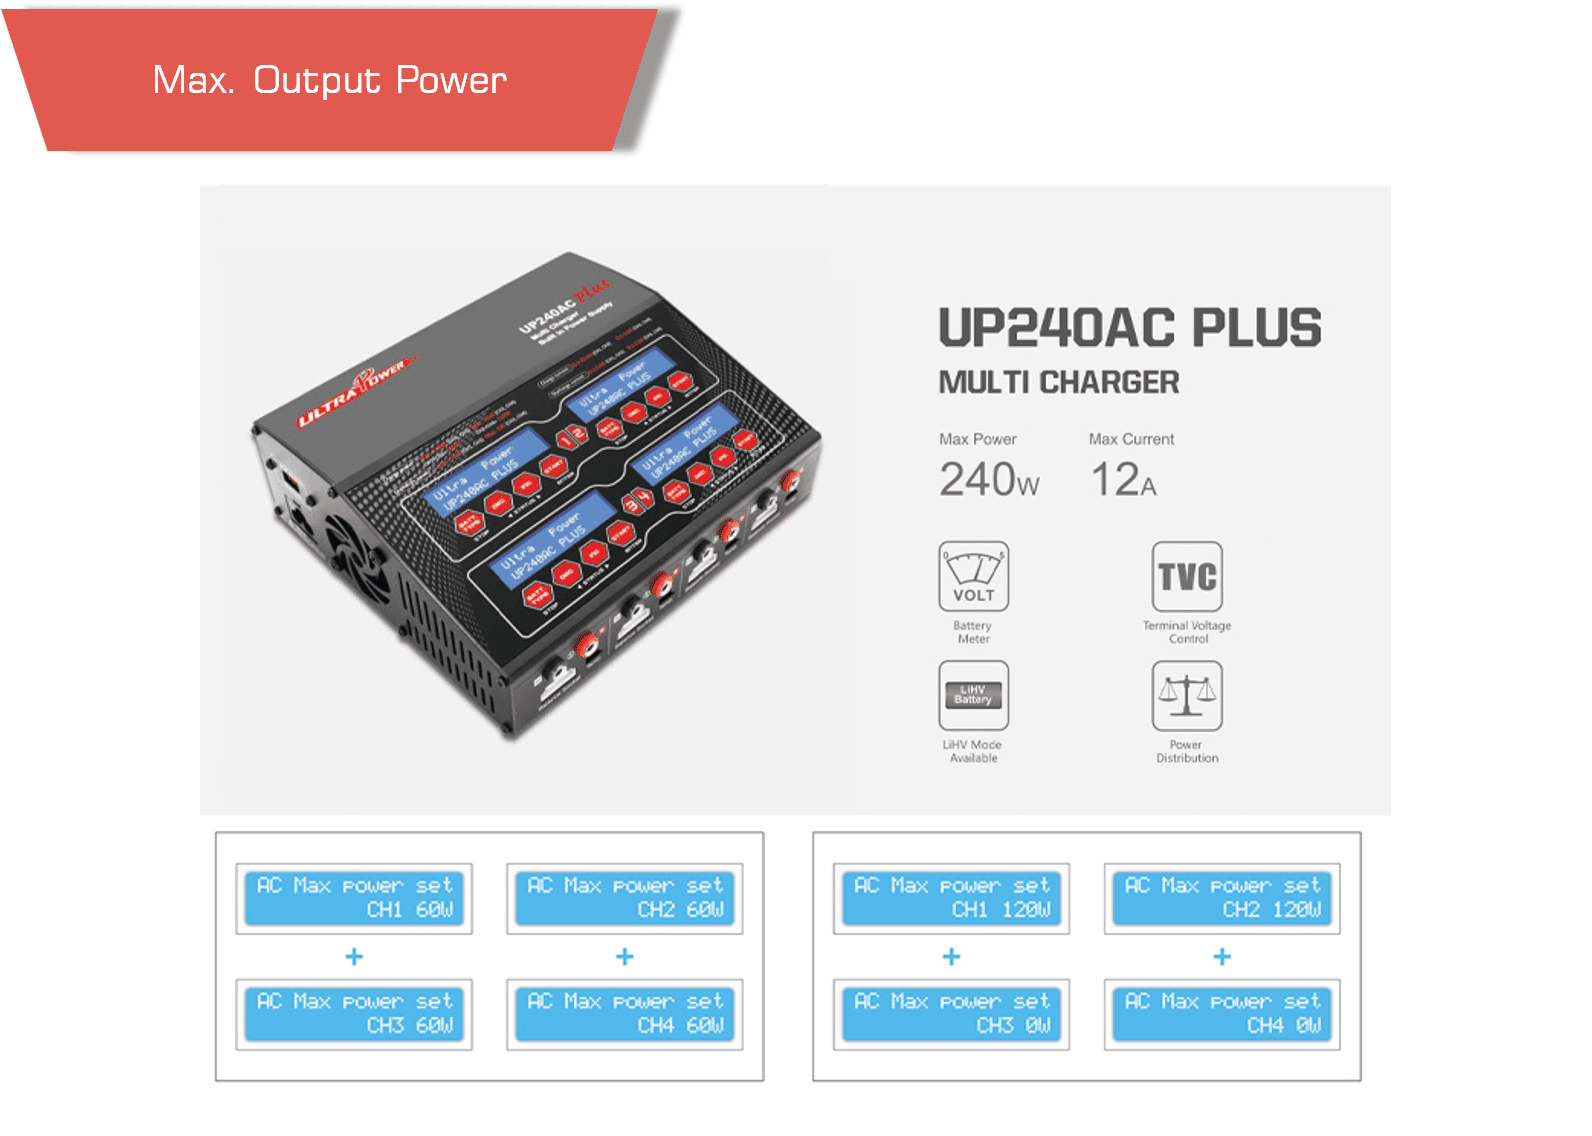 Max power up240 min - ultra power up240,ultra power charger,lipo charger,battery uav charger - motionew - 4